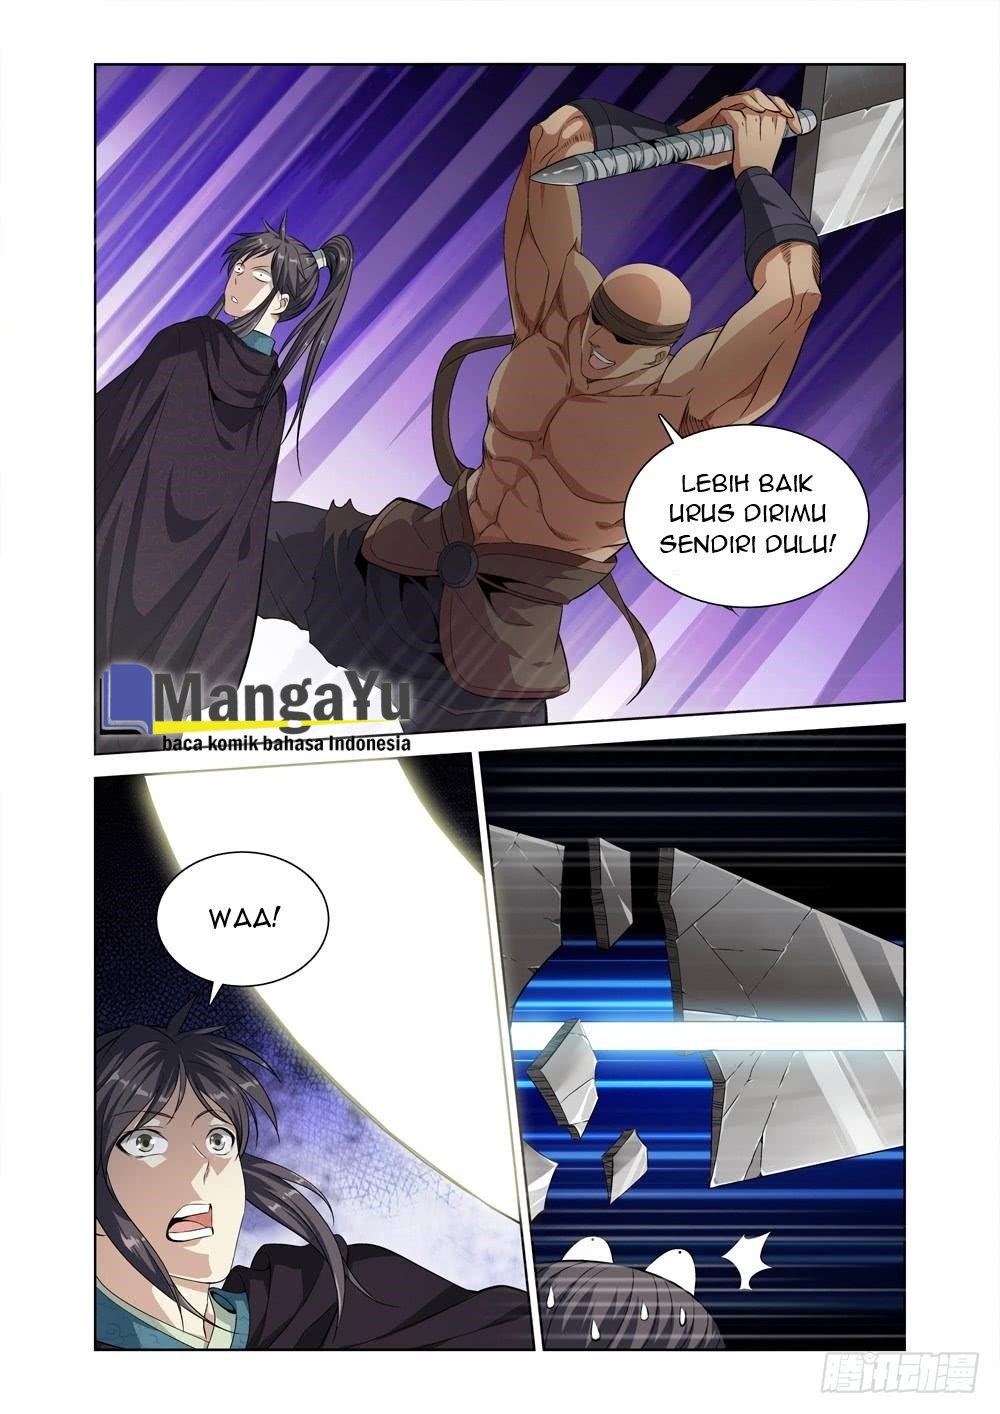 Strongest System Yan Luo Chapter 7